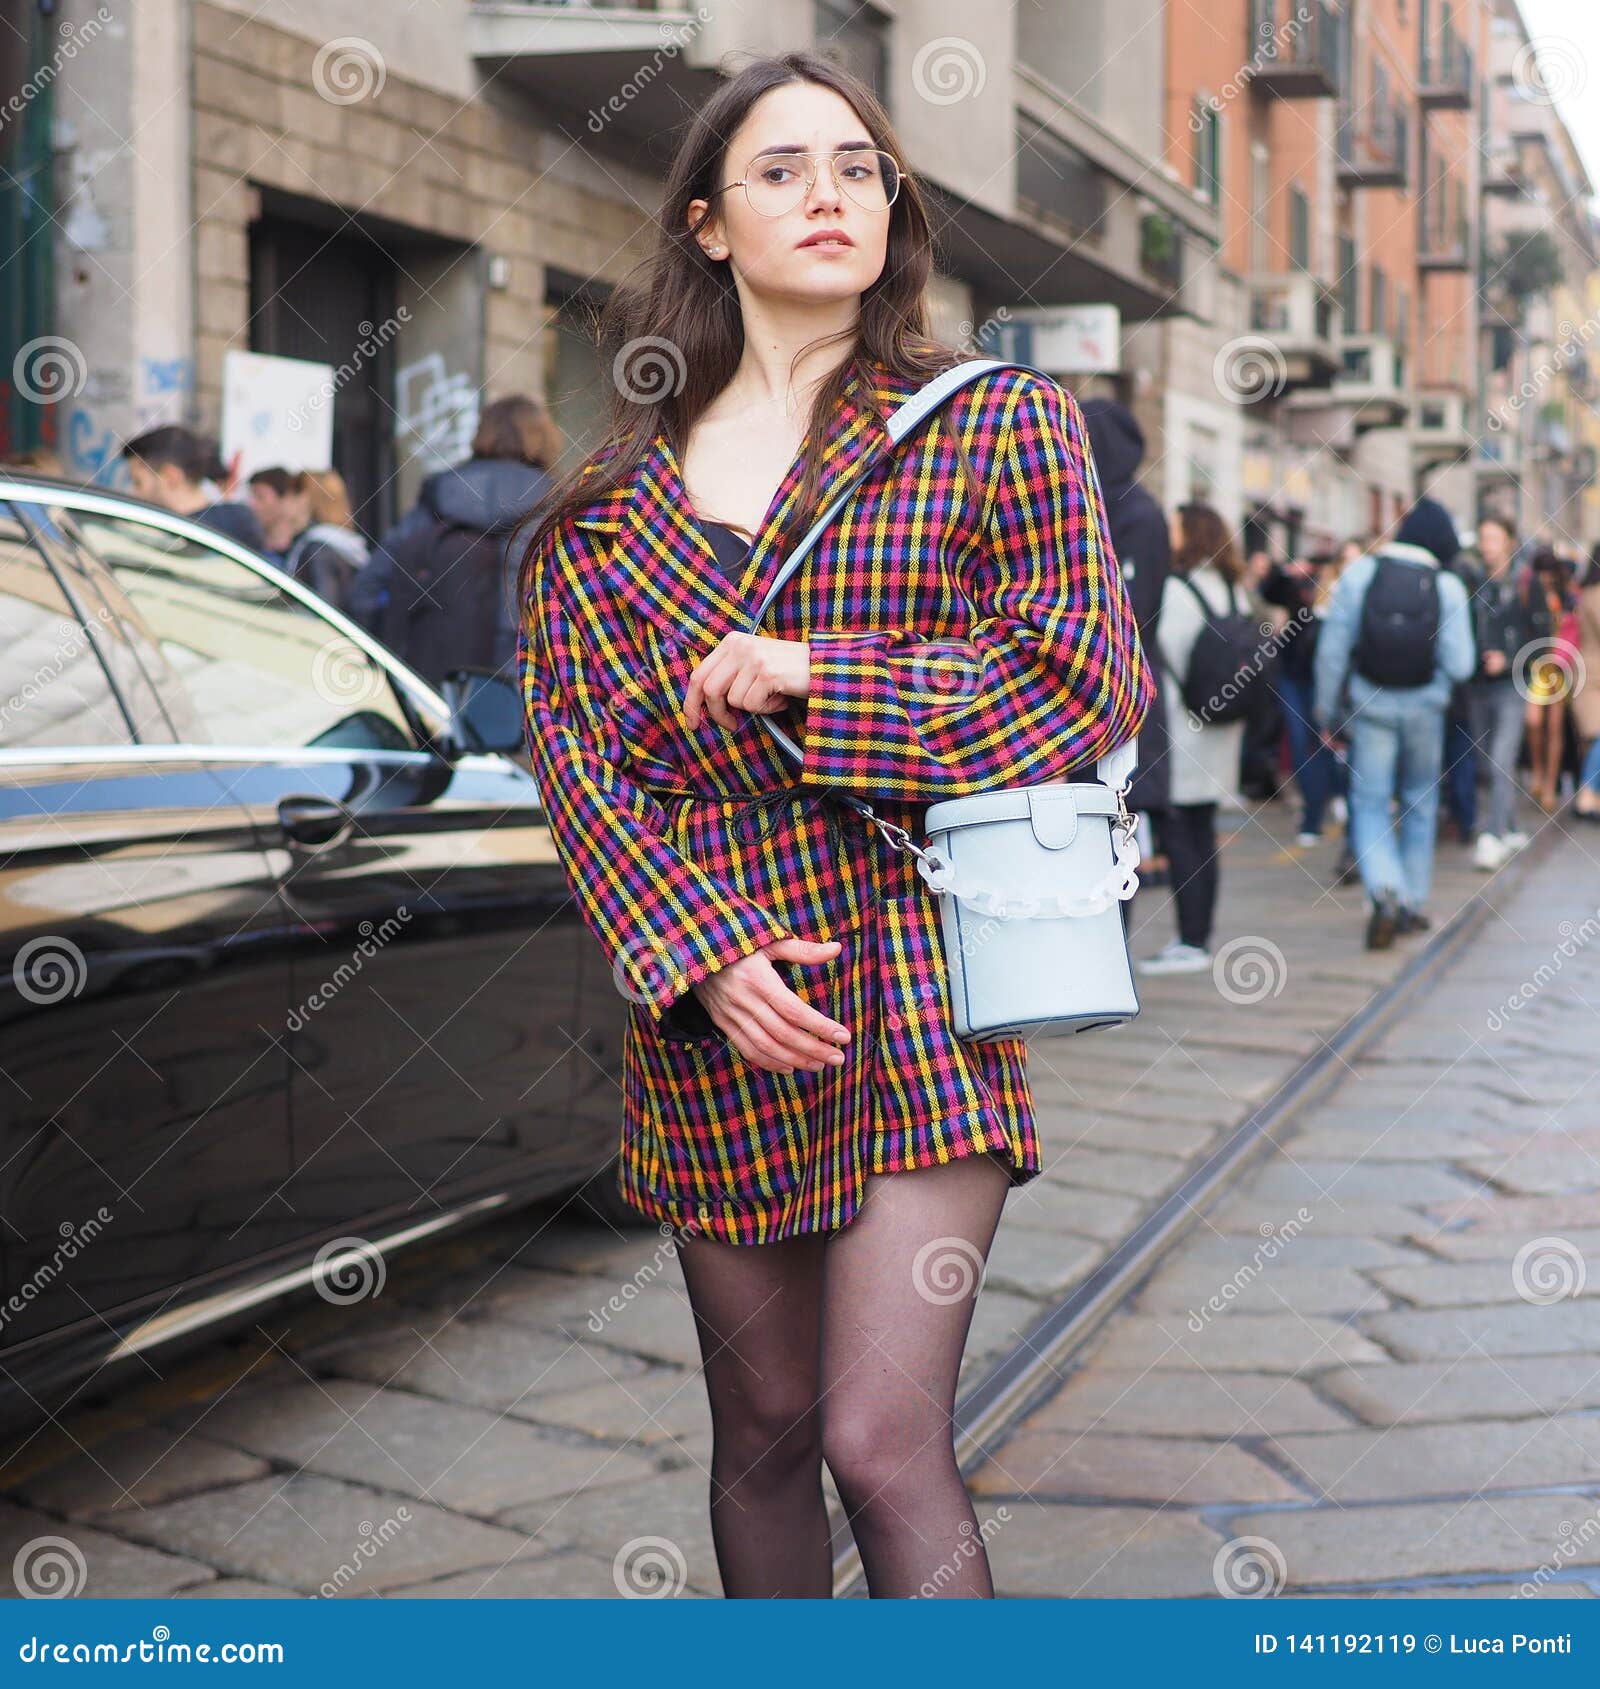 Milan Italy 20 February 2019 Fashion Blogger Street Style Outfit